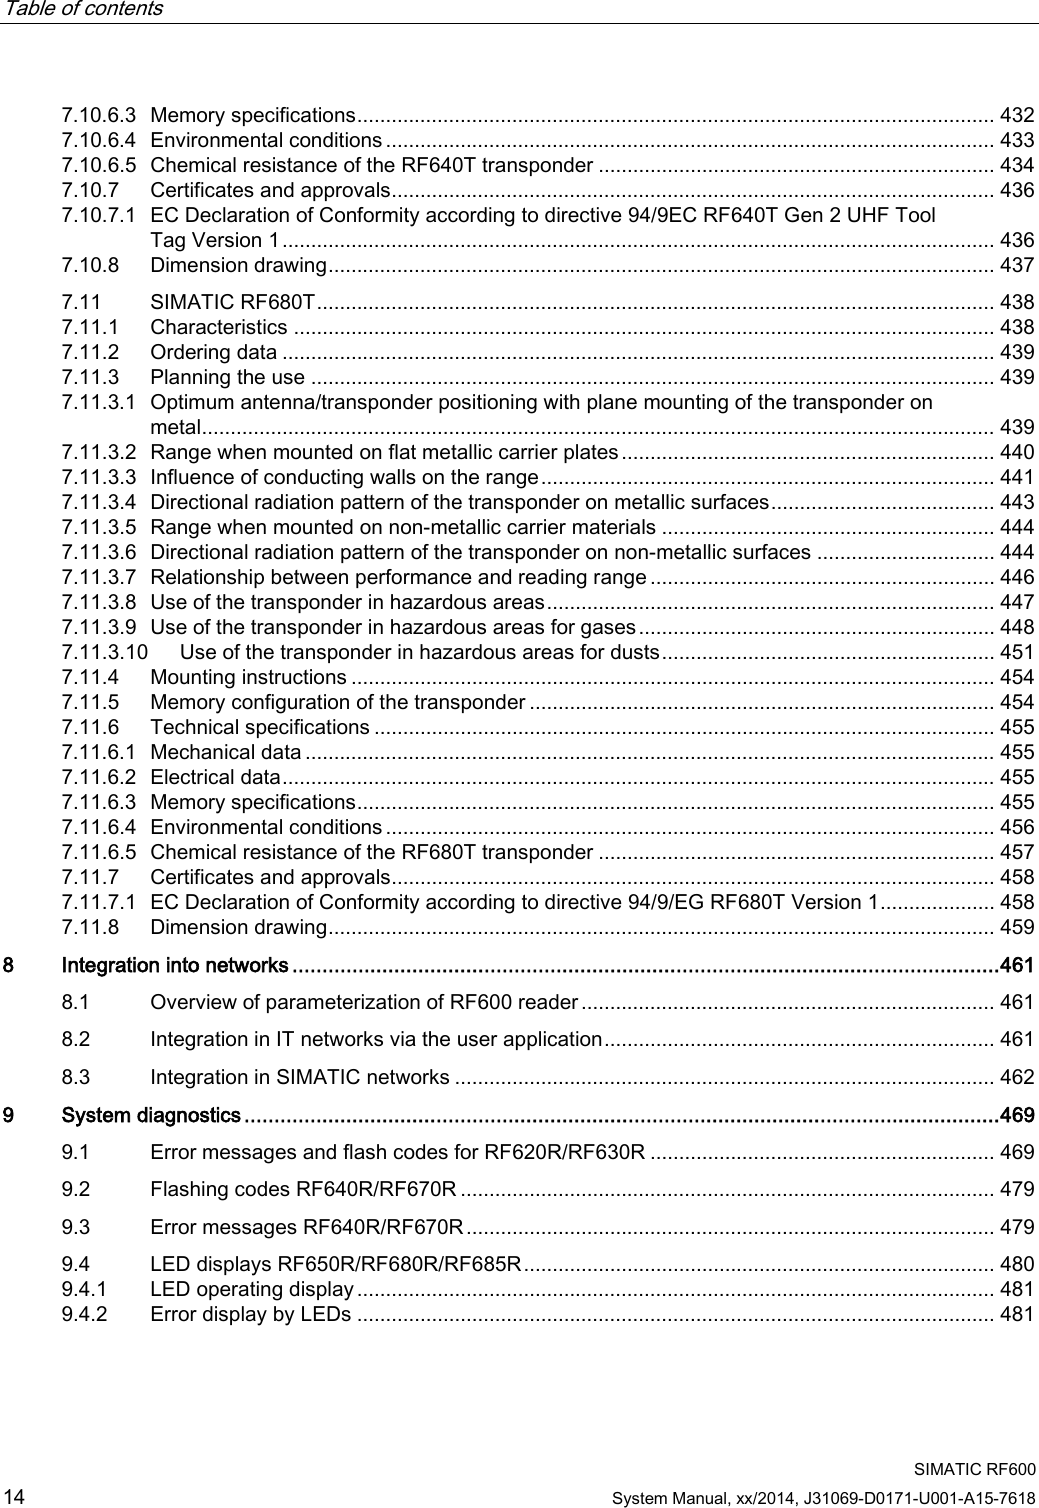 Table of contents      SIMATIC RF600 14 System Manual, xx/2014, J31069-D0171-U001-A15-7618 7.10.6.3 Memory specifications ............................................................................................................... 432 7.10.6.4 Environmental conditions .......................................................................................................... 433 7.10.6.5 Chemical resistance of the RF640T transponder ..................................................................... 434 7.10.7 Certificates and approvals......................................................................................................... 436 7.10.7.1 EC Declaration of Conformity according to directive 94/9EC RF640T Gen 2 UHF Tool Tag Version 1 ............................................................................................................................ 436 7.10.8 Dimension drawing .................................................................................................................... 437 7.11 SIMATIC RF680T ...................................................................................................................... 438 7.11.1 Characteristics .......................................................................................................................... 438 7.11.2 Ordering data ............................................................................................................................ 439 7.11.3 Planning the use ....................................................................................................................... 439 7.11.3.1 Optimum antenna/transponder positioning with plane mounting of the transponder on metal .......................................................................................................................................... 439 7.11.3.2 Range when mounted on flat metallic carrier plates ................................................................. 440 7.11.3.3 Influence of conducting walls on the range ............................................................................... 441 7.11.3.4 Directional radiation pattern of the transponder on metallic surfaces ....................................... 443 7.11.3.5 Range when mounted on non-metallic carrier materials .......................................................... 444 7.11.3.6 Directional radiation pattern of the transponder on non-metallic surfaces ............................... 444 7.11.3.7 Relationship between performance and reading range ............................................................ 446 7.11.3.8 Use of the transponder in hazardous areas .............................................................................. 447 7.11.3.9 Use of the transponder in hazardous areas for gases .............................................................. 448 7.11.3.10 Use of the transponder in hazardous areas for dusts .......................................................... 451 7.11.4 Mounting instructions ................................................................................................................ 454 7.11.5 Memory configuration of the transponder ................................................................................. 454 7.11.6 Technical specifications ............................................................................................................ 455 7.11.6.1 Mechanical data ........................................................................................................................ 455 7.11.6.2 Electrical data ............................................................................................................................ 455 7.11.6.3 Memory specifications ............................................................................................................... 455 7.11.6.4 Environmental conditions .......................................................................................................... 456 7.11.6.5 Chemical resistance of the RF680T transponder ..................................................................... 457 7.11.7 Certificates and approvals......................................................................................................... 458 7.11.7.1 EC Declaration of Conformity according to directive 94/9/EG RF680T Version 1 .................... 458 7.11.8 Dimension drawing .................................................................................................................... 459 8  Integration into networks ...................................................................................................................... 461 8.1 Overview of parameterization of RF600 reader ........................................................................ 461 8.2 Integration in IT networks via the user application .................................................................... 461 8.3 Integration in SIMATIC networks .............................................................................................. 462 9  System diagnostics .............................................................................................................................. 469 9.1 Error messages and flash codes for RF620R/RF630R ............................................................ 469 9.2 Flashing codes RF640R/RF670R ............................................................................................. 479 9.3 Error messages RF640R/RF670R ............................................................................................ 479 9.4 LED displays RF650R/RF680R/RF685R .................................................................................. 480 9.4.1 LED operating display ............................................................................................................... 481 9.4.2 Error display by LEDs ............................................................................................................... 481 